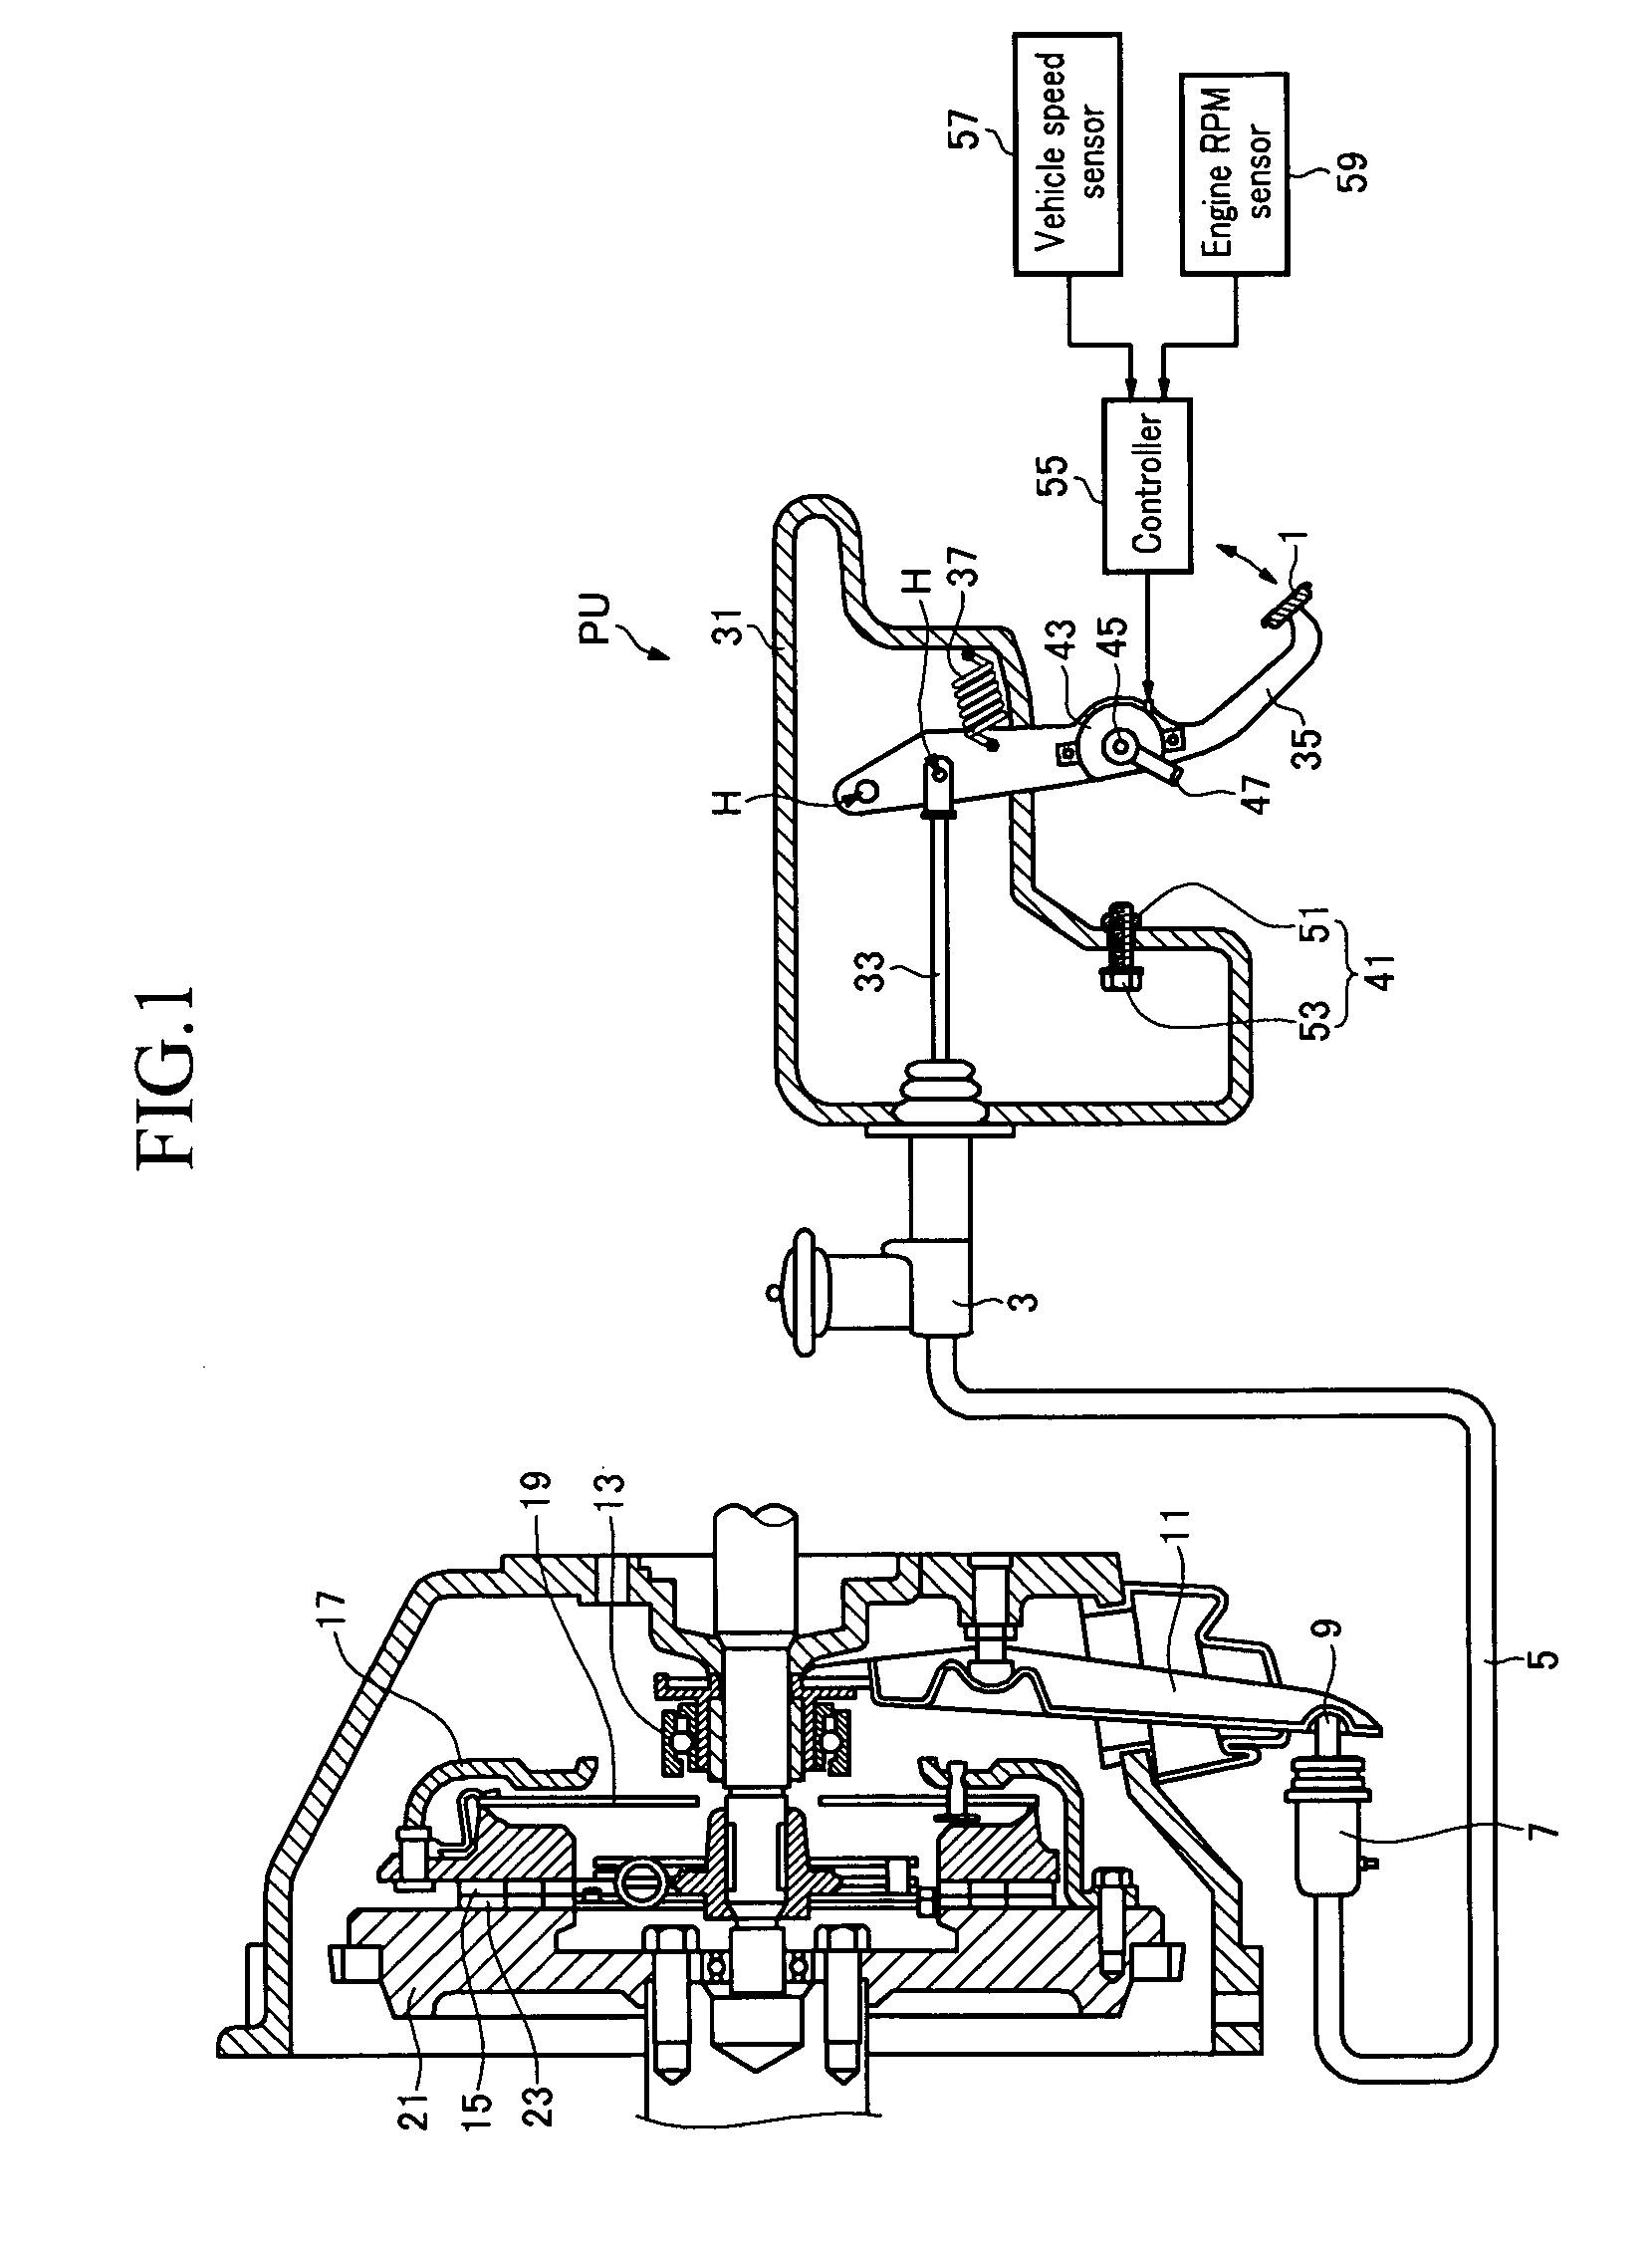 Device for varying stroke of clutch pedal